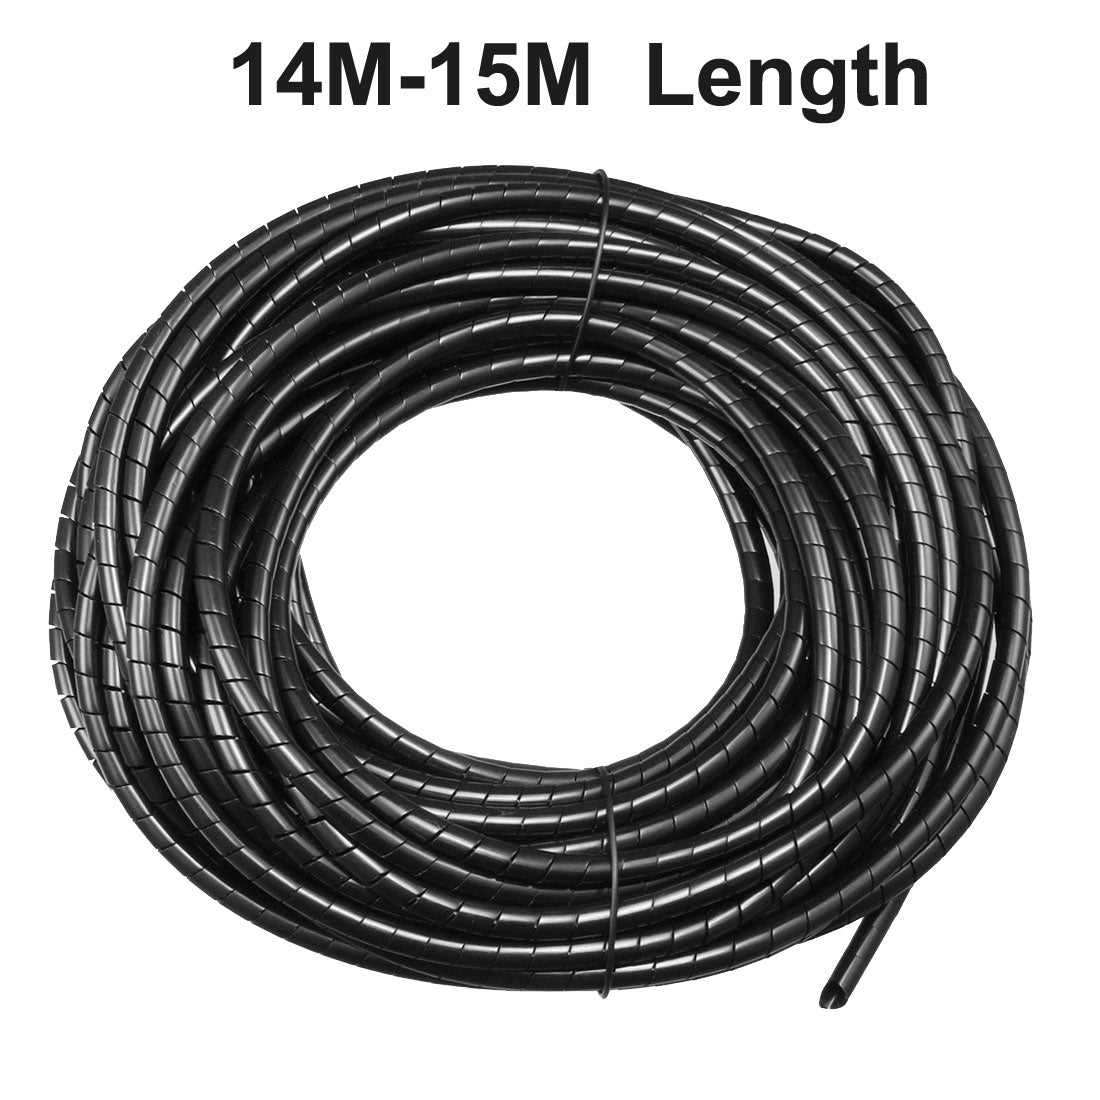 uxcell Uxcell 4mm Flexible Spiral Tube Cable Wire Wrap Computer Manage Cord Black 14-15M